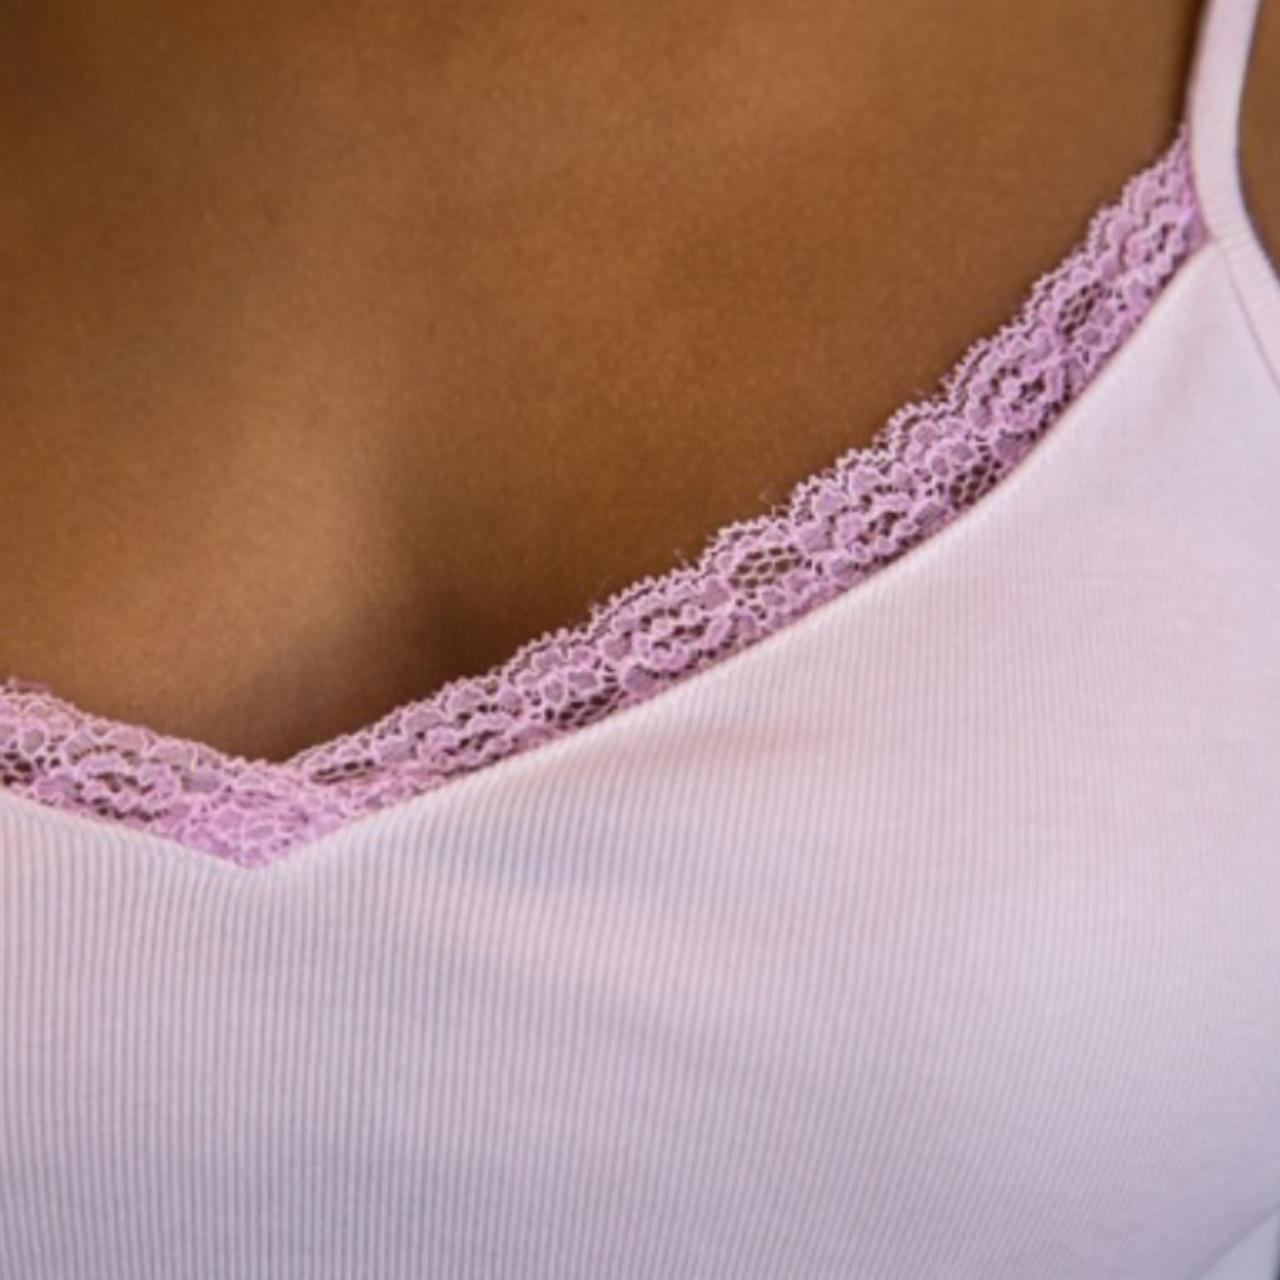 BRANDY MELVILLE PINK Nicolette Crop Lace Tank Top Perfect Condition £9.00 -  PicClick UK